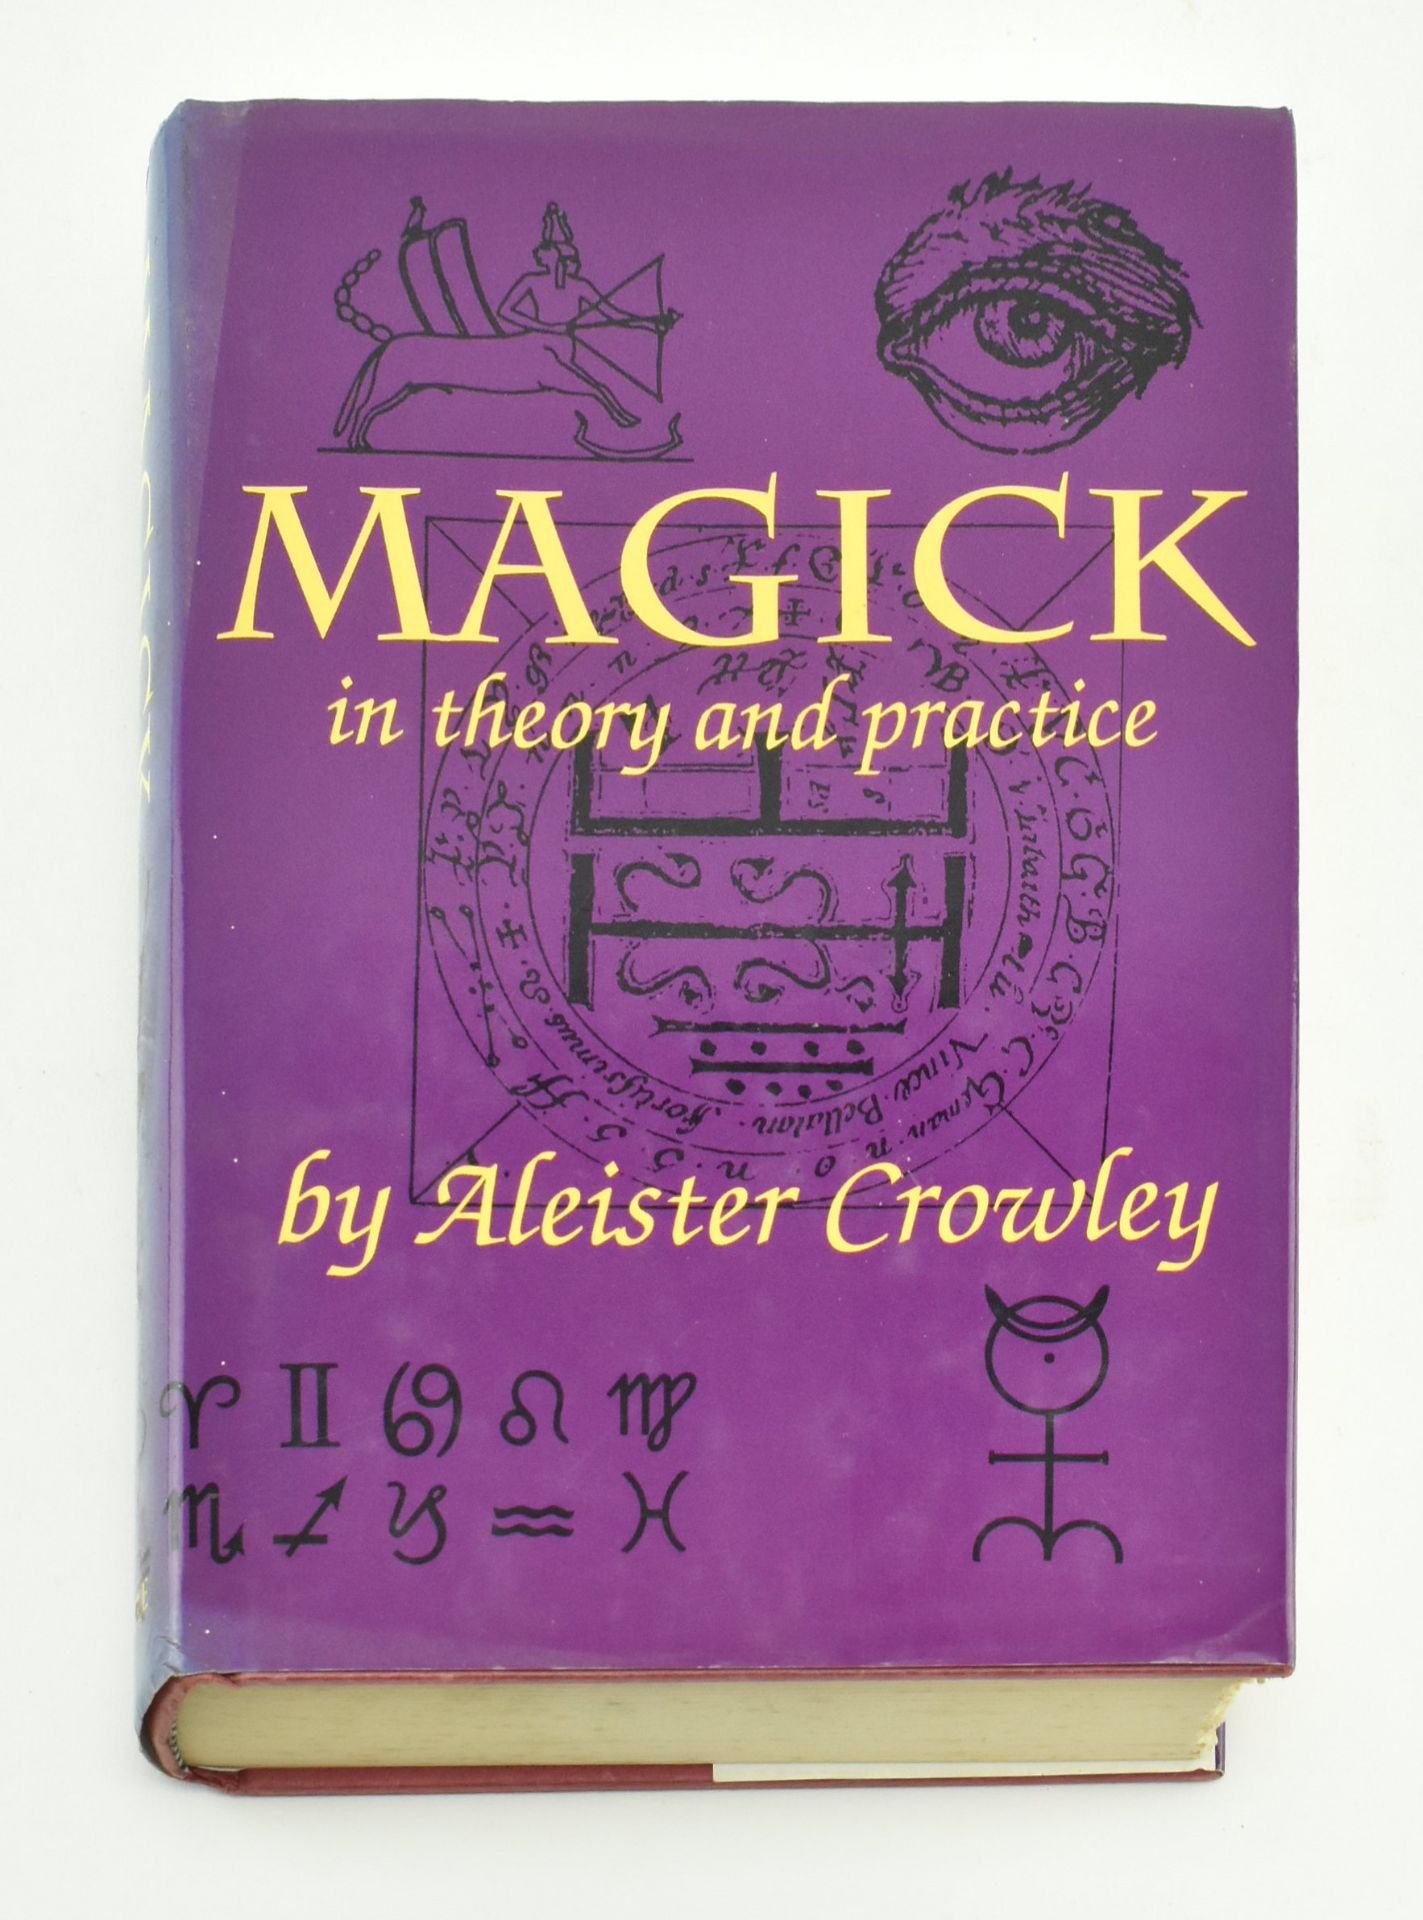 MAGIC & OCCULT INTEREST. TWO BOOKS ON MAGICAL THEORY - Image 3 of 12